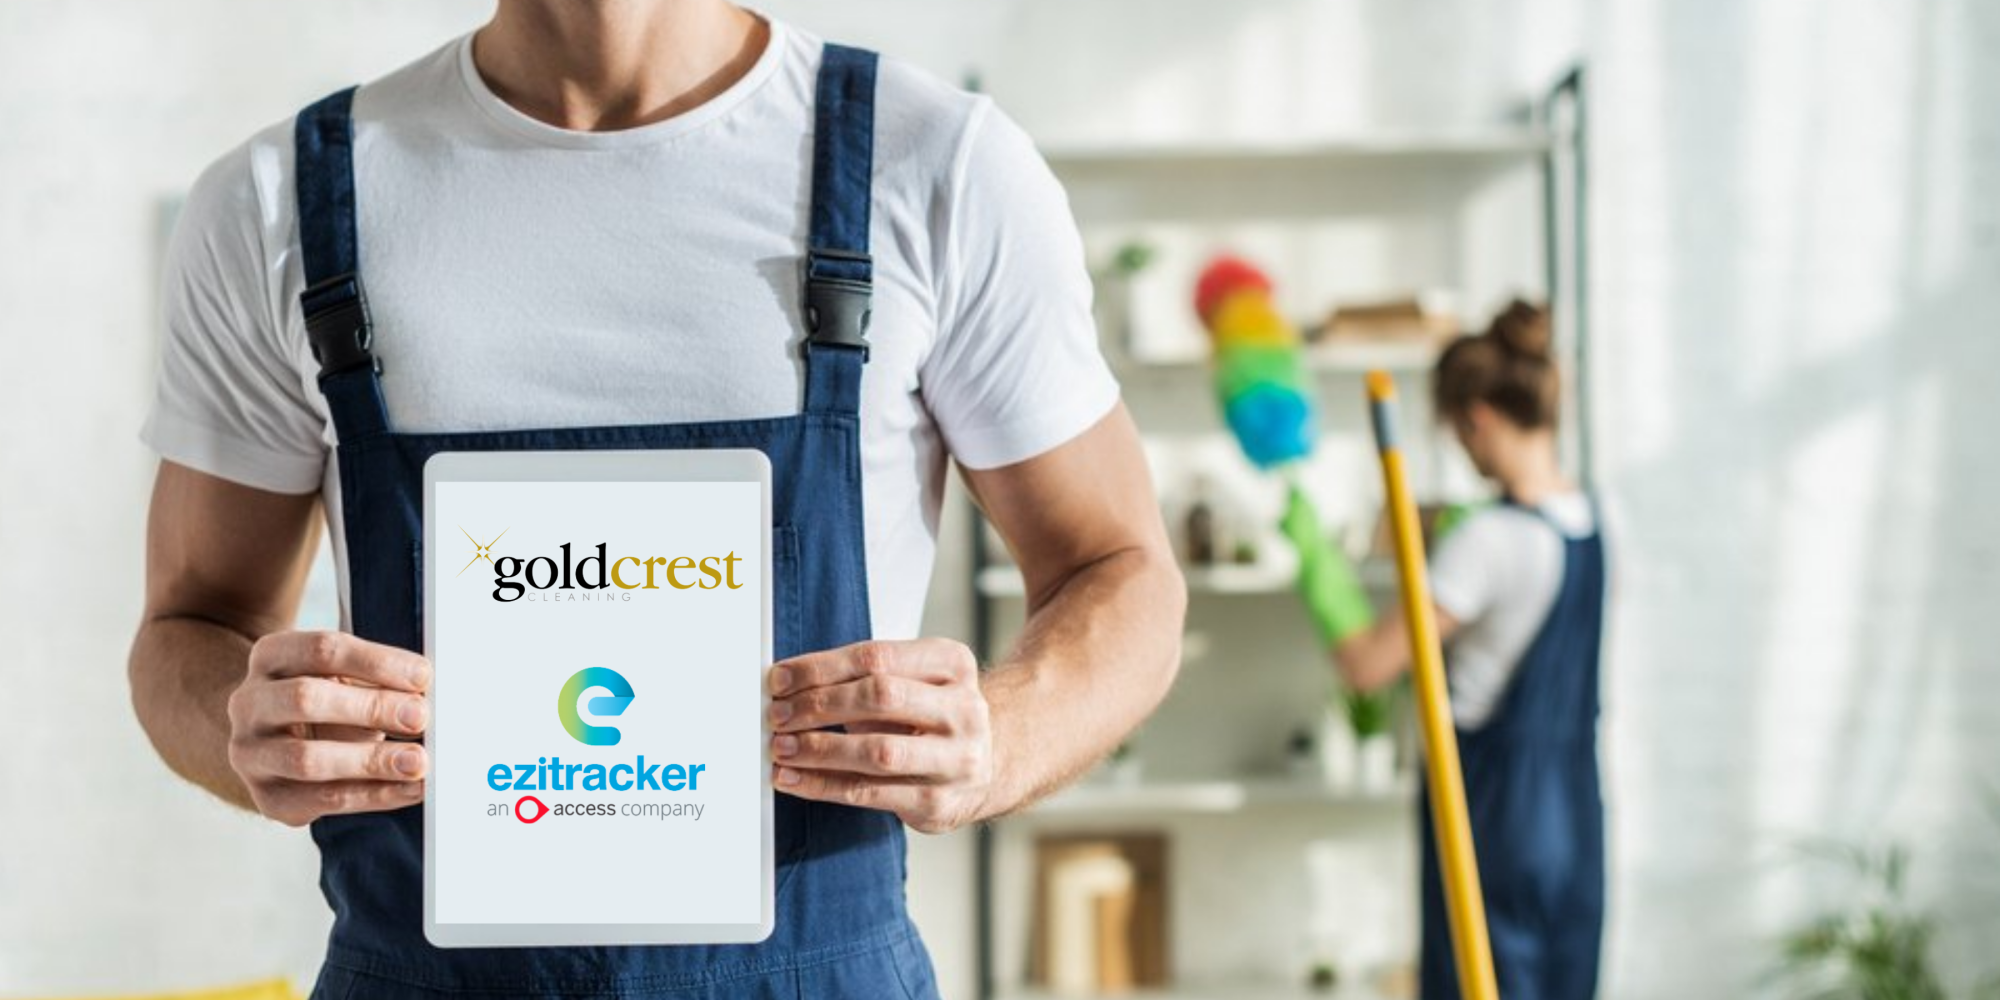 Ezitracker Provides Workforce Management Tech Across Goldcrest Cleaning Contract